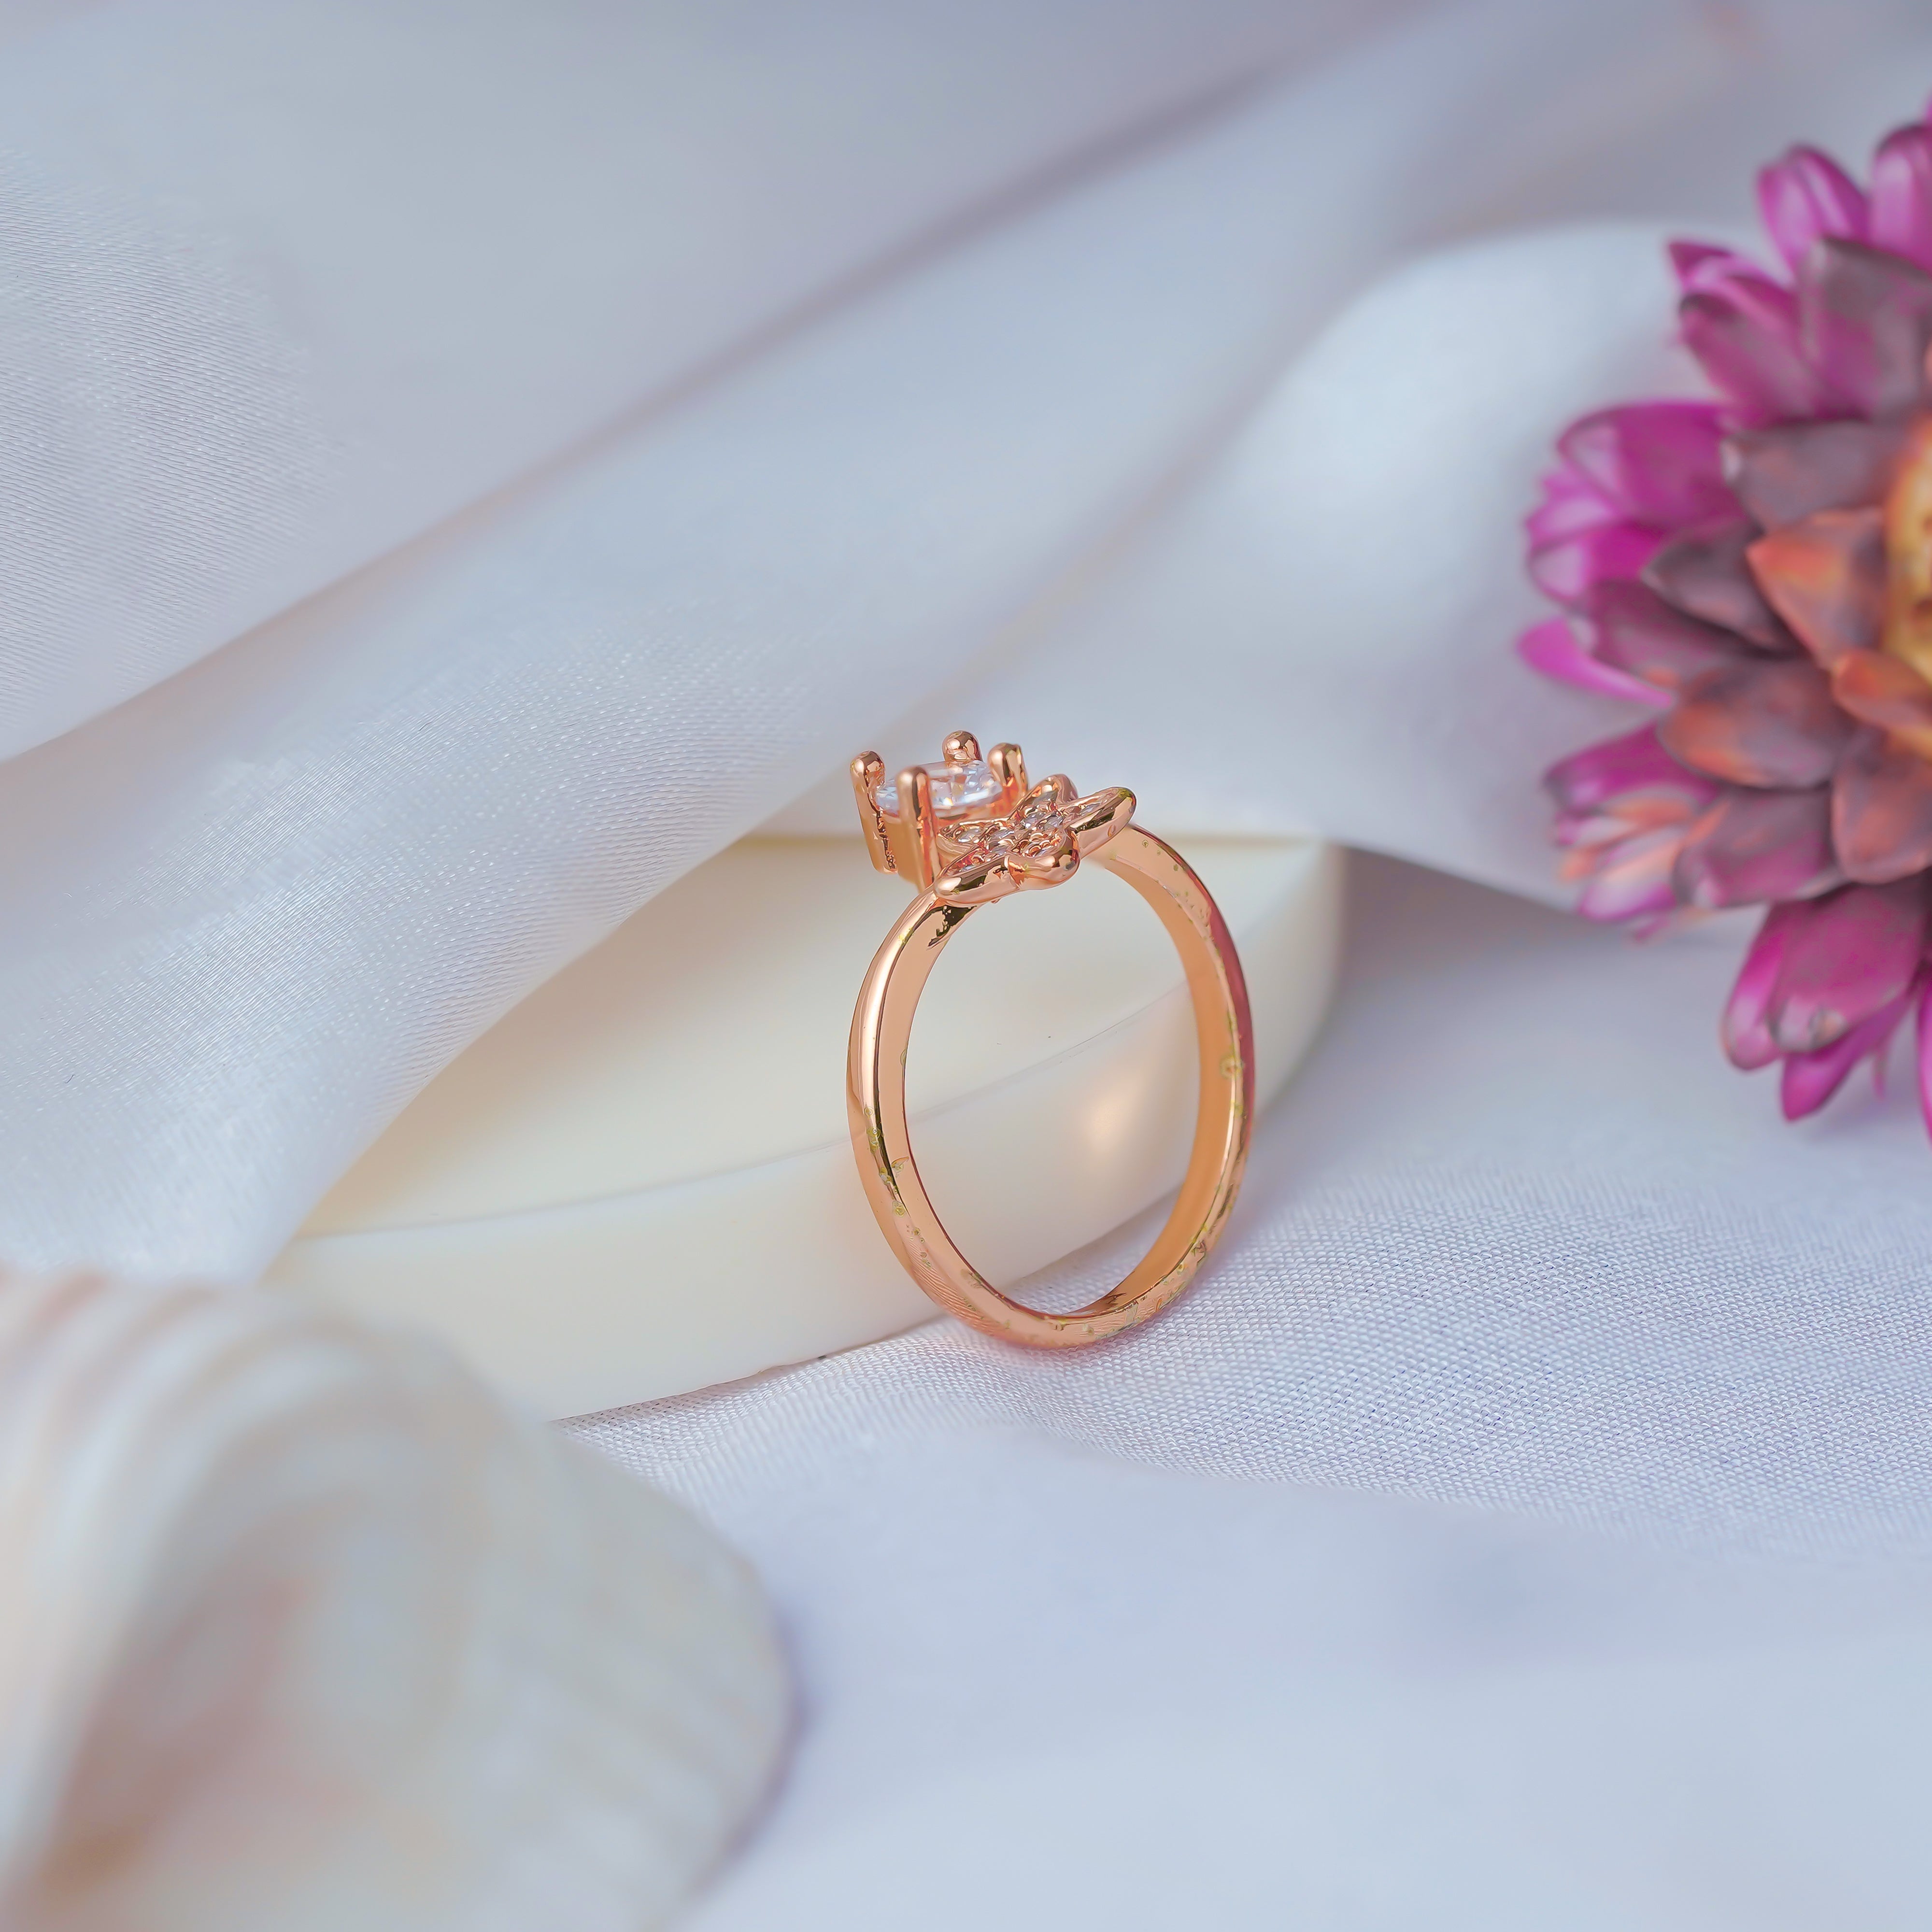 Rose Gold Glamour: Designer Artificial Ring for Every Occasion